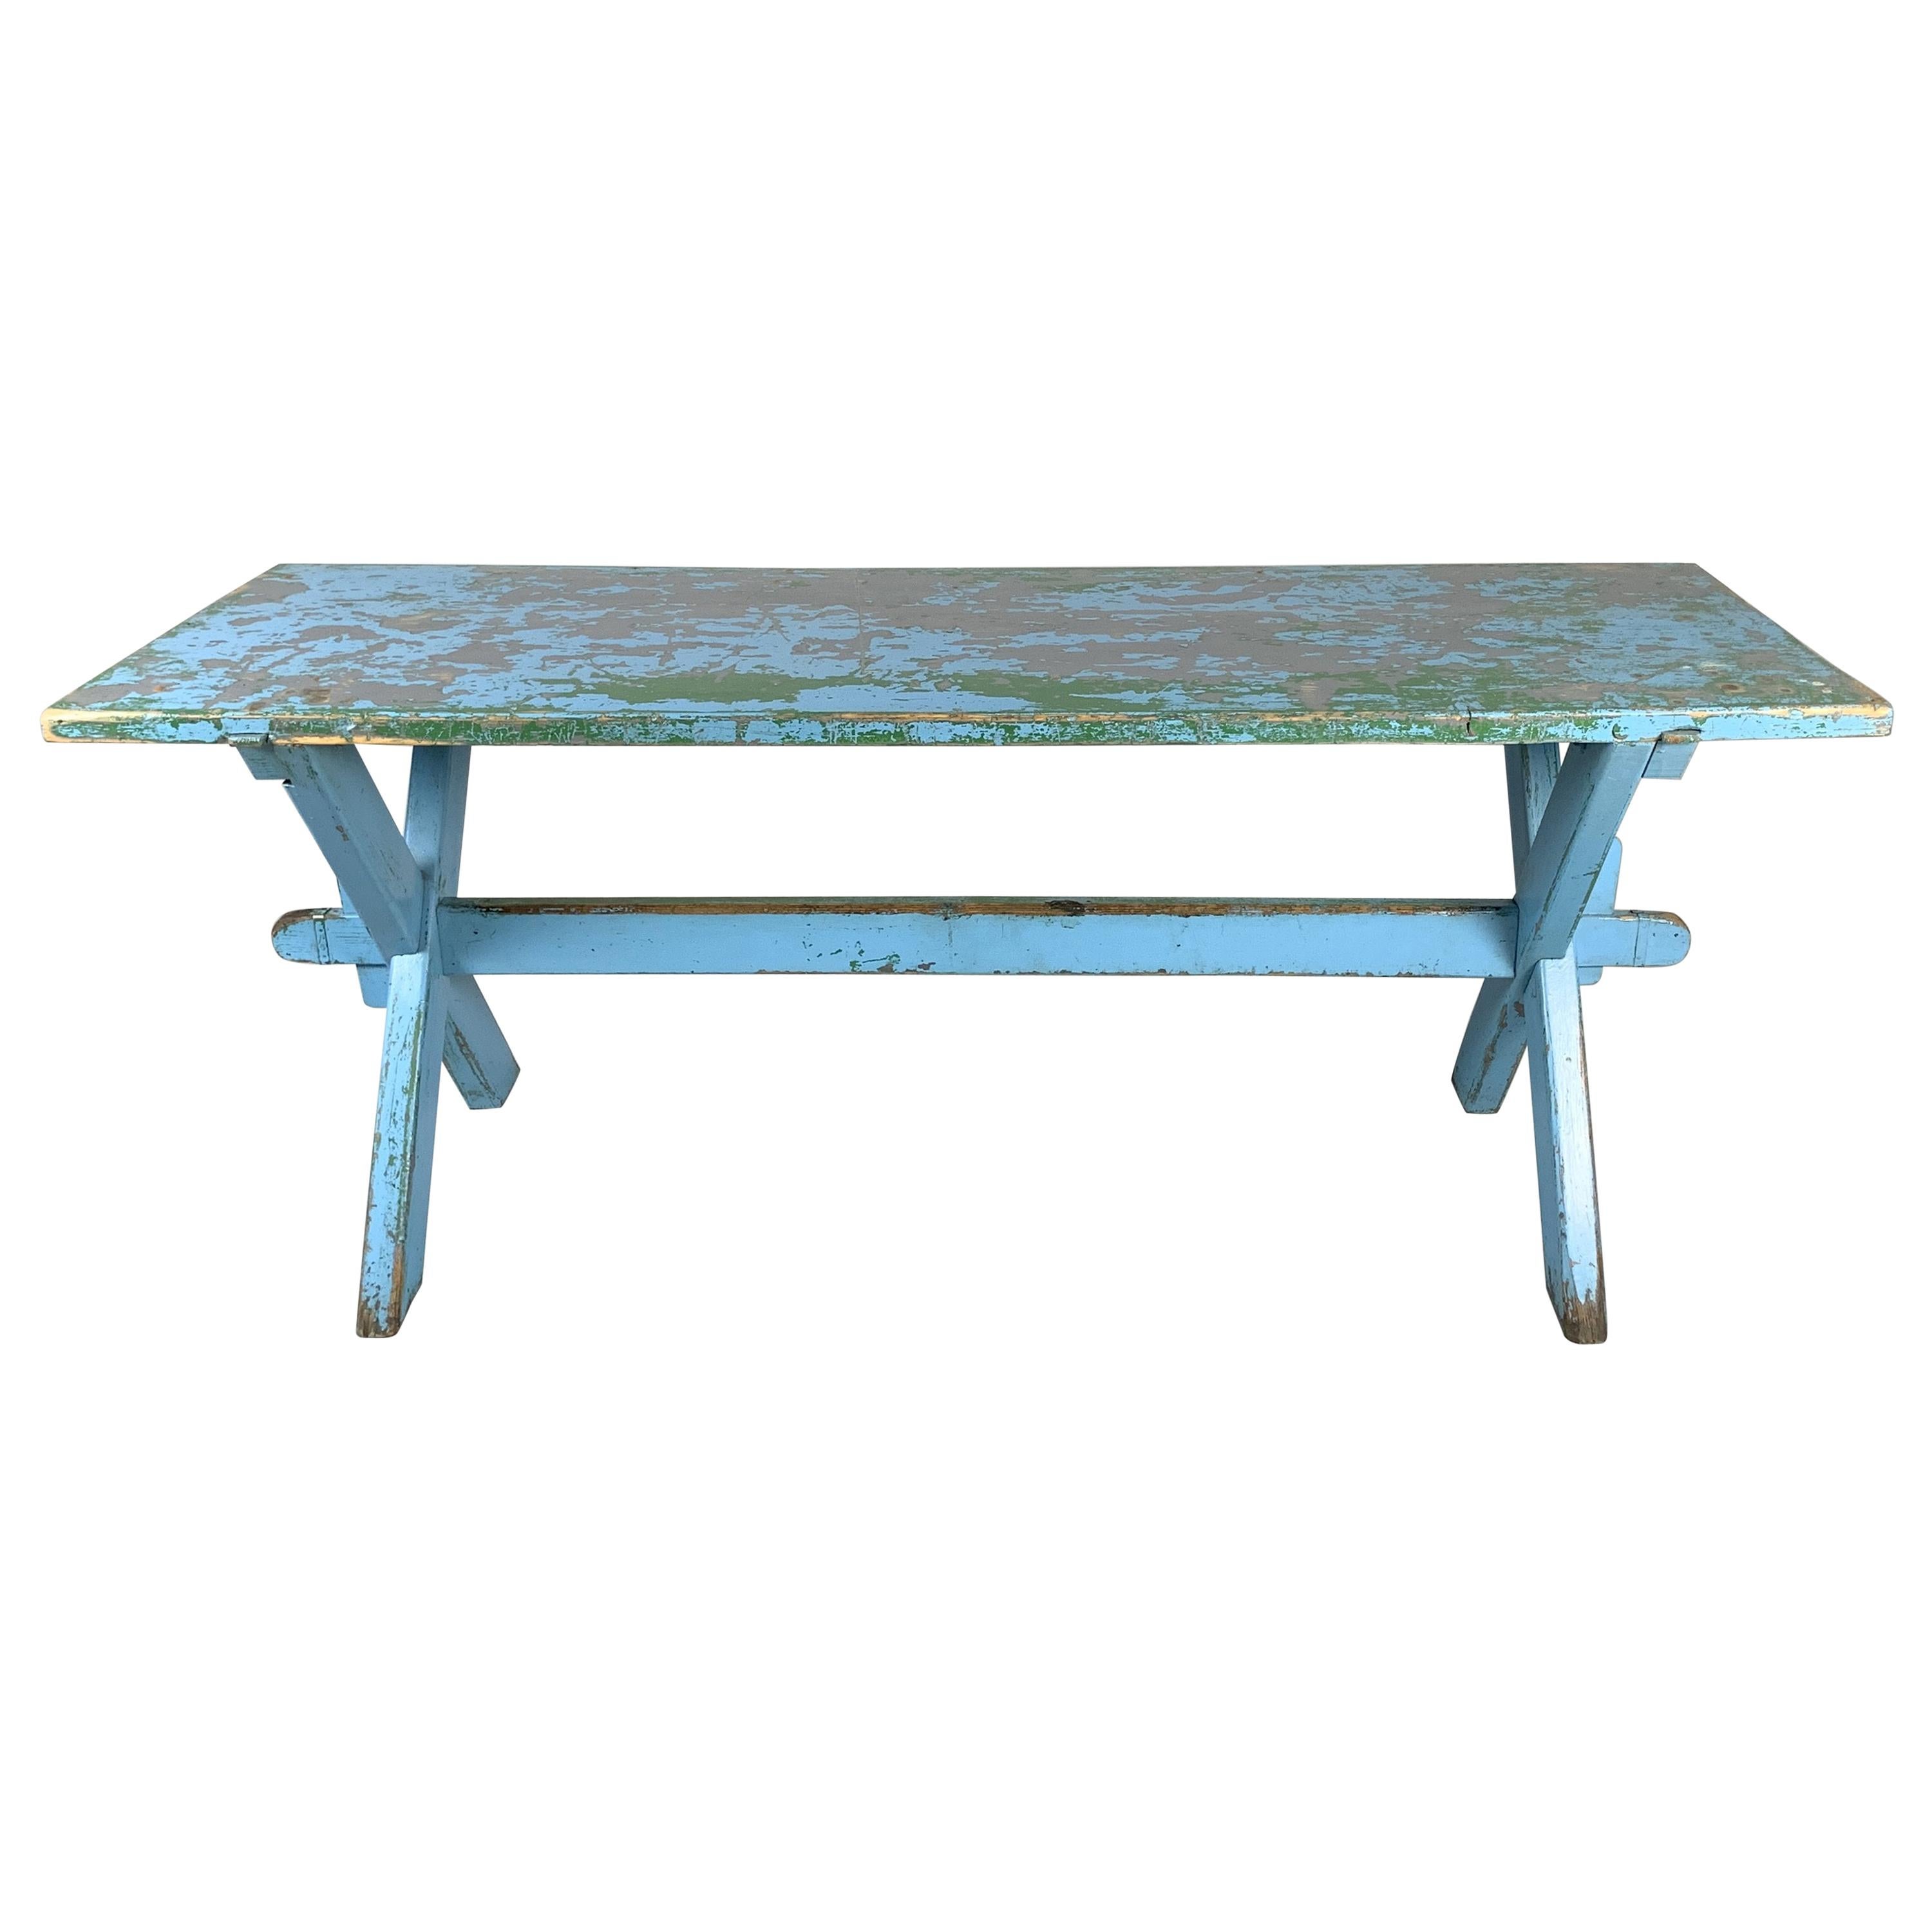 Solid Vintage All-Wood Table with Original Patina, 1910s For Sale